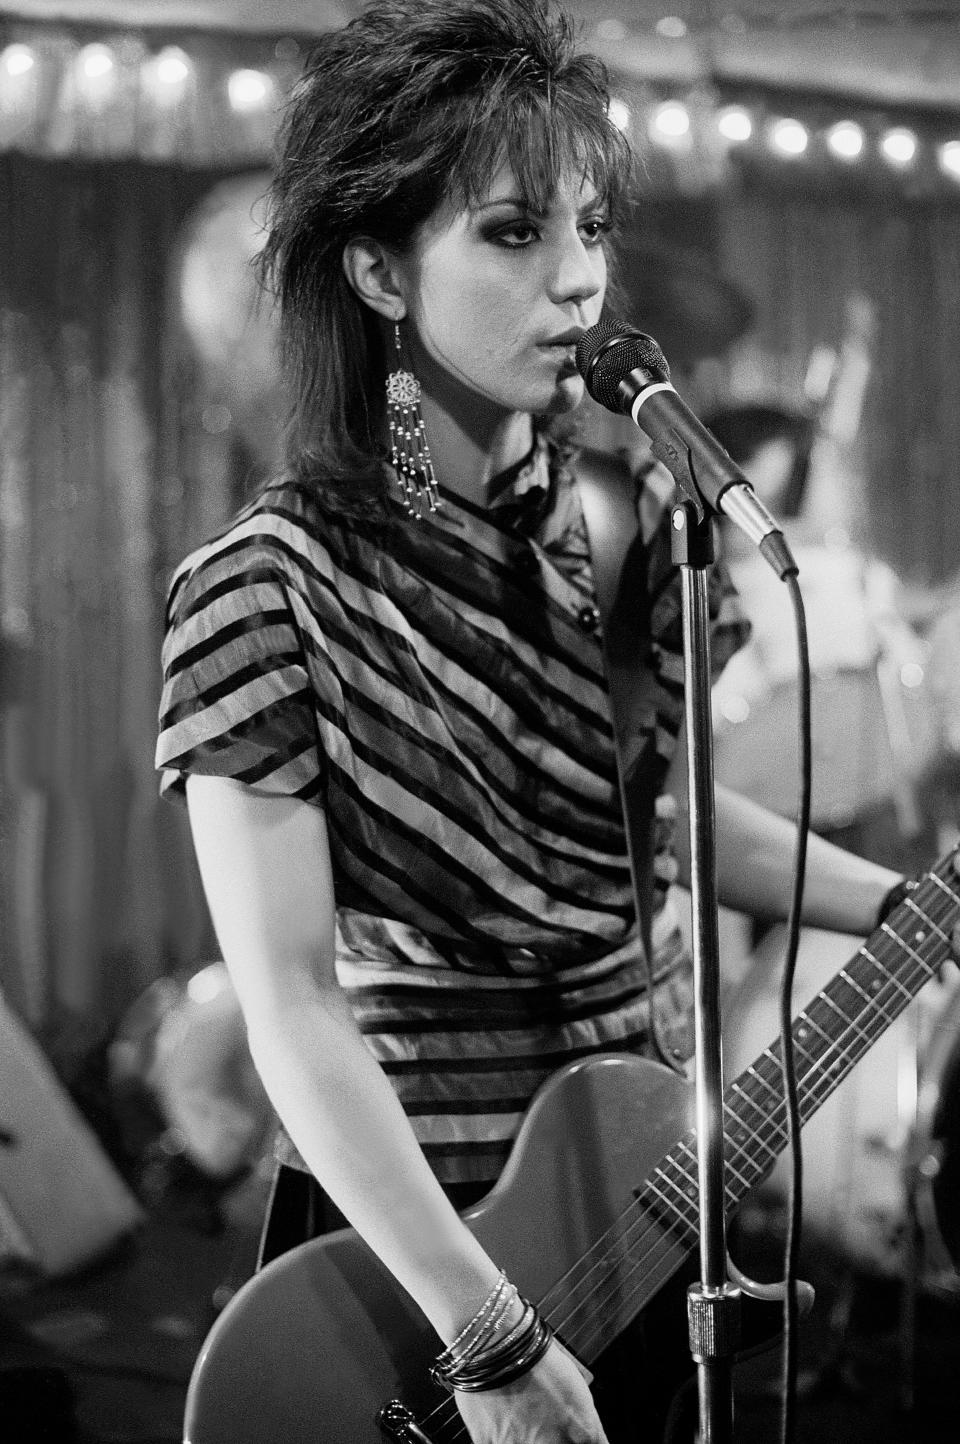 <p> Rock and roll style would never be the same thanks to Joan Jett: As founder of The Runaways and frontrunner for Joan Jett and the Blackhearts, she was an immensely talented singer and public figure. But her style was iconic because she knew what worked for her (mainly: leather, chains, statement jackets, strategic use of color, with a touch of femininity and a ton of jewelry), and she made small, but important evolutions to her look throughout her long career. </p>